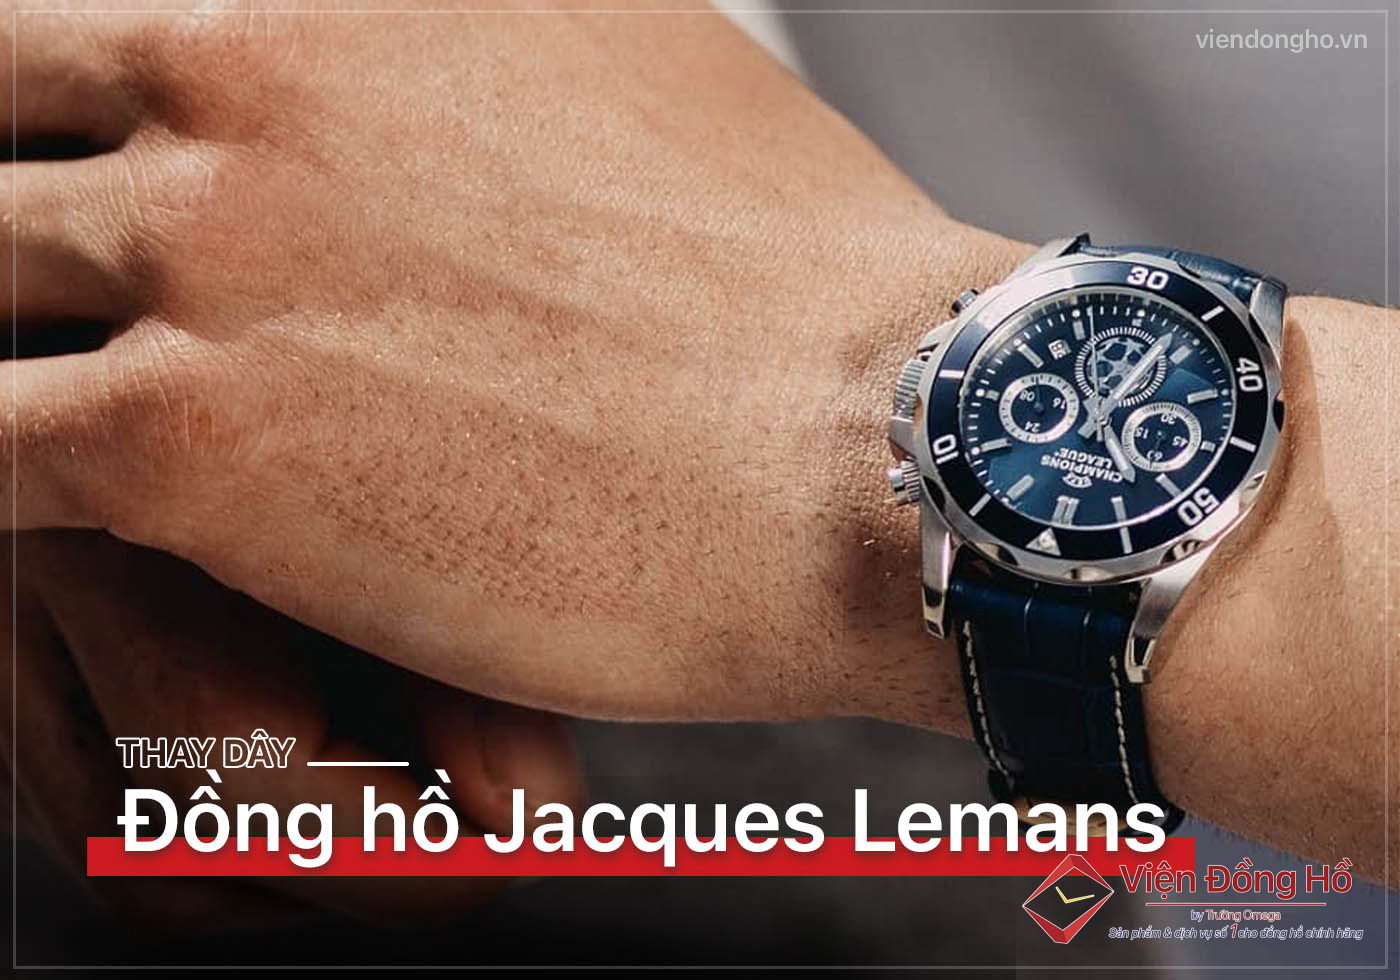 Thay day dong ho Jacques Lemans 5